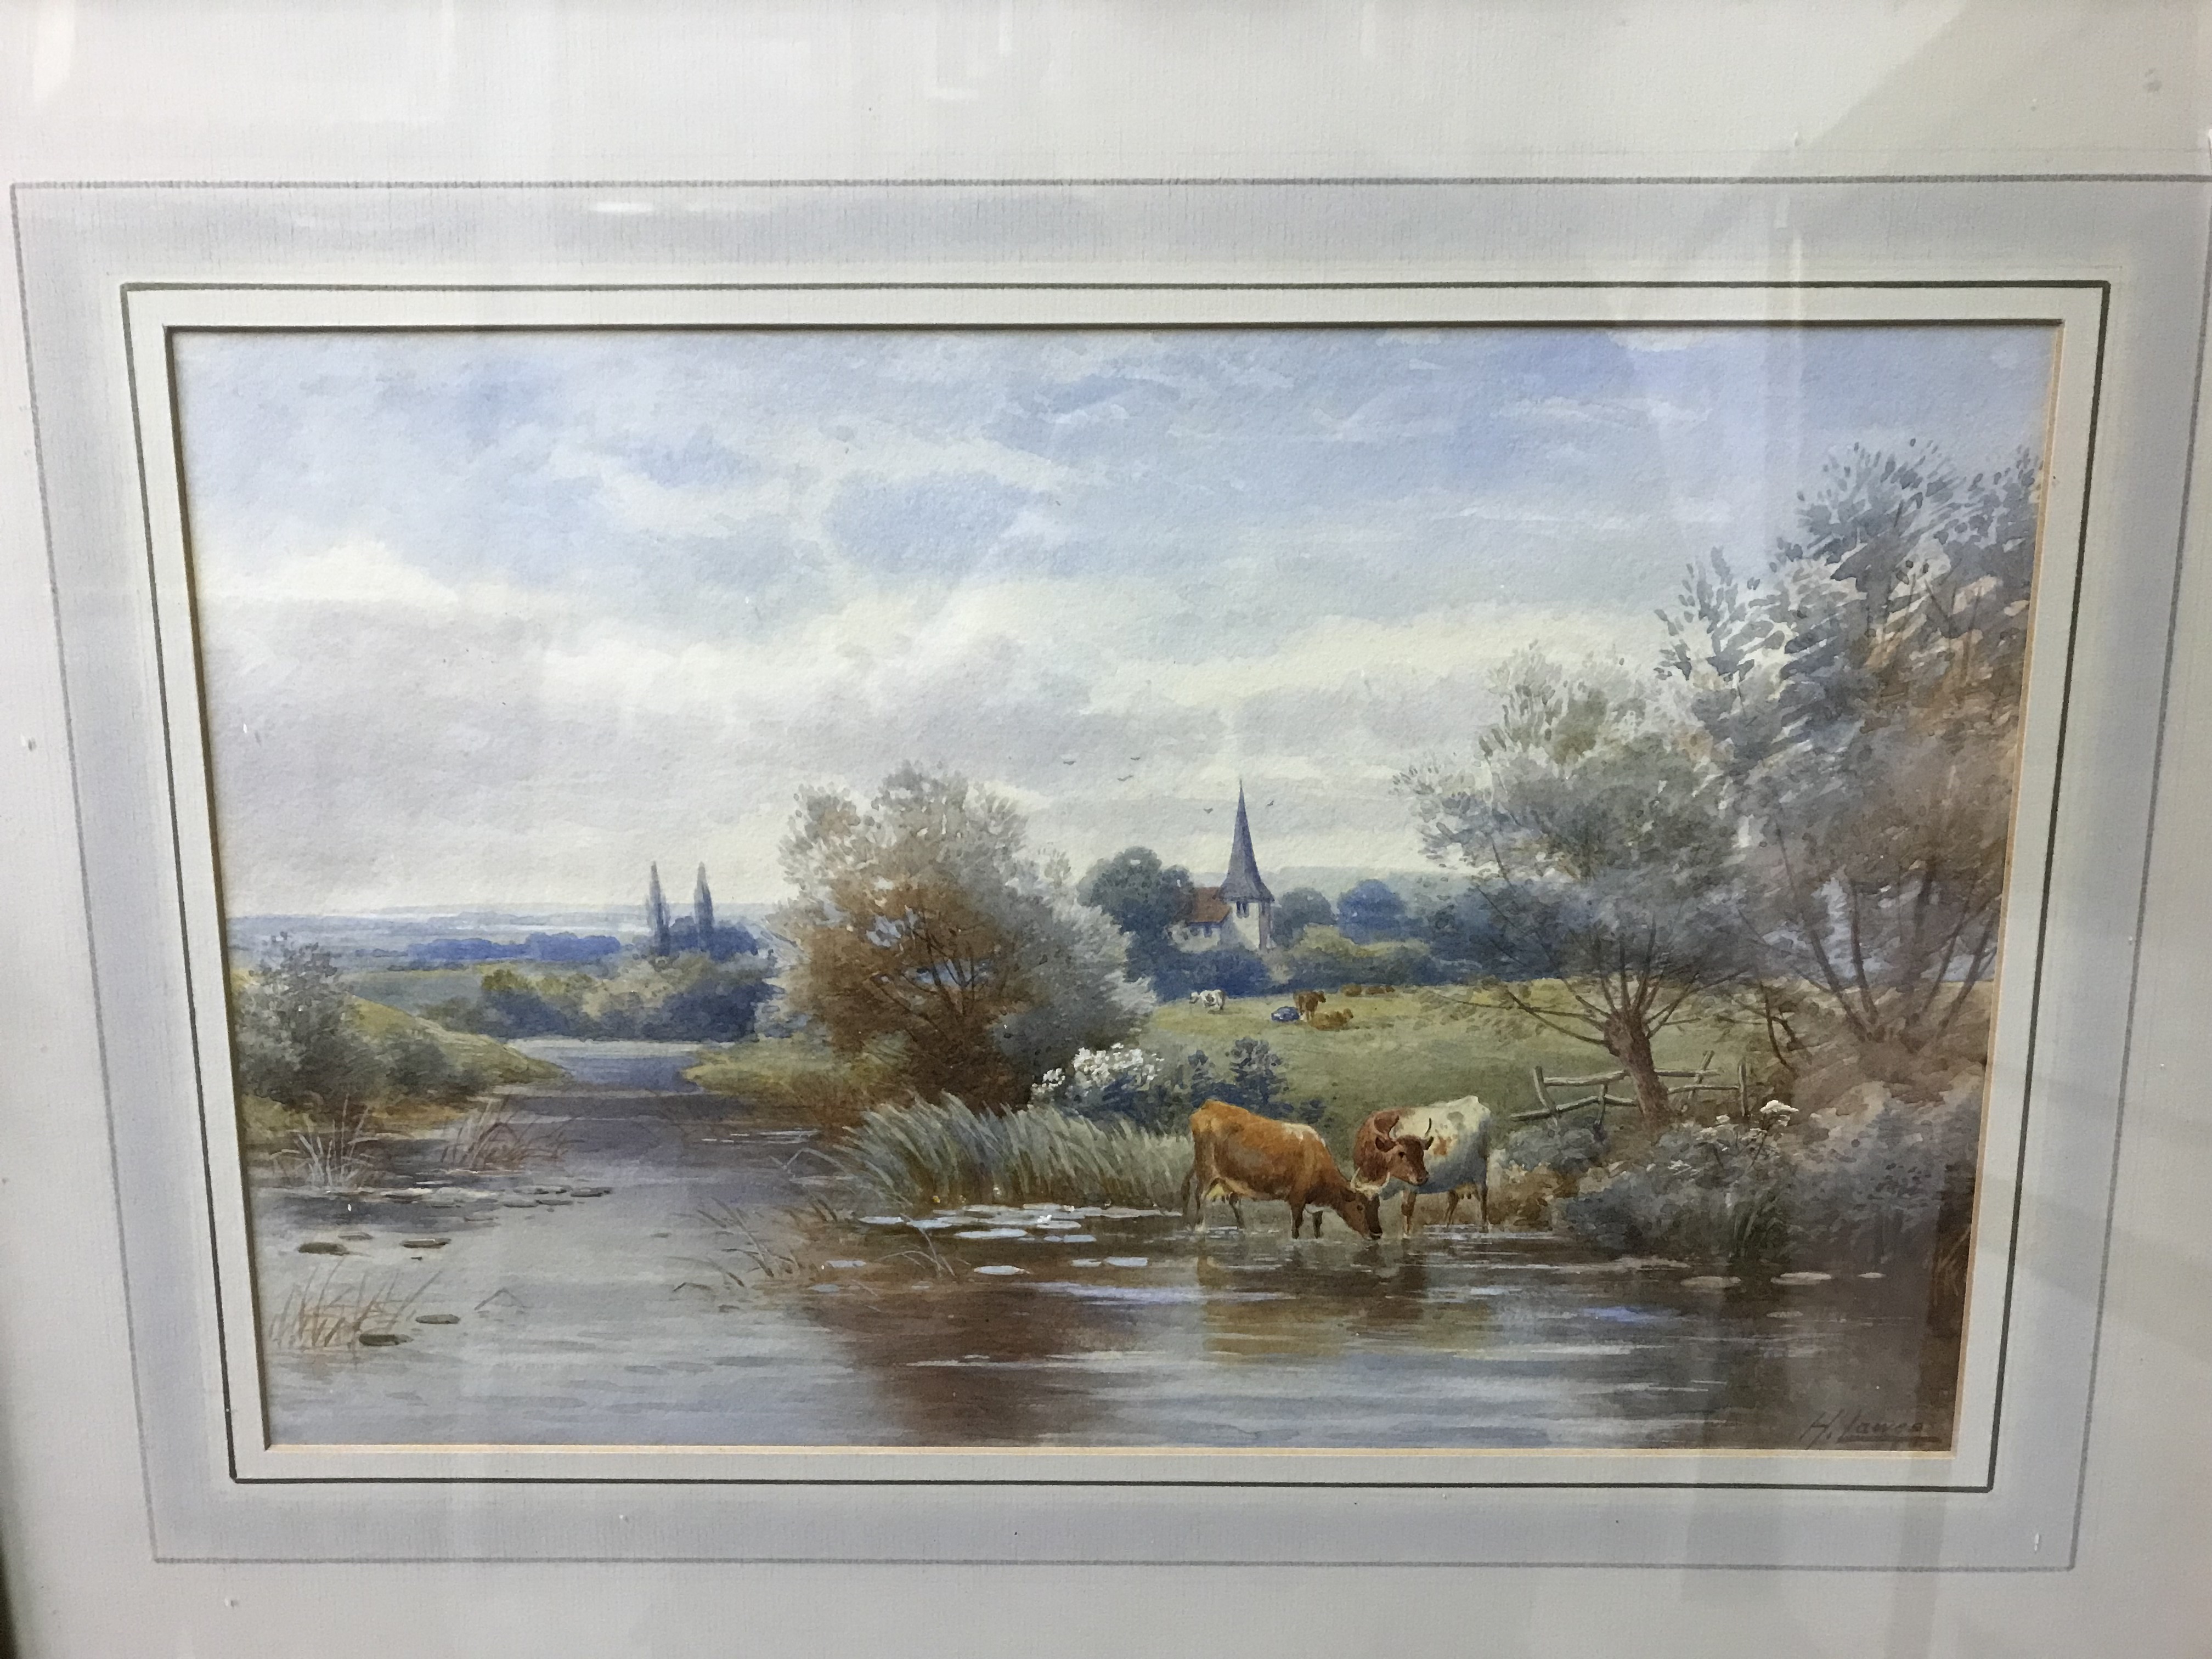 E LAWES "Rural landscape with cows in foreground" watercolour, signed lower right, 22 cm x 34 cm, S. - Image 3 of 4